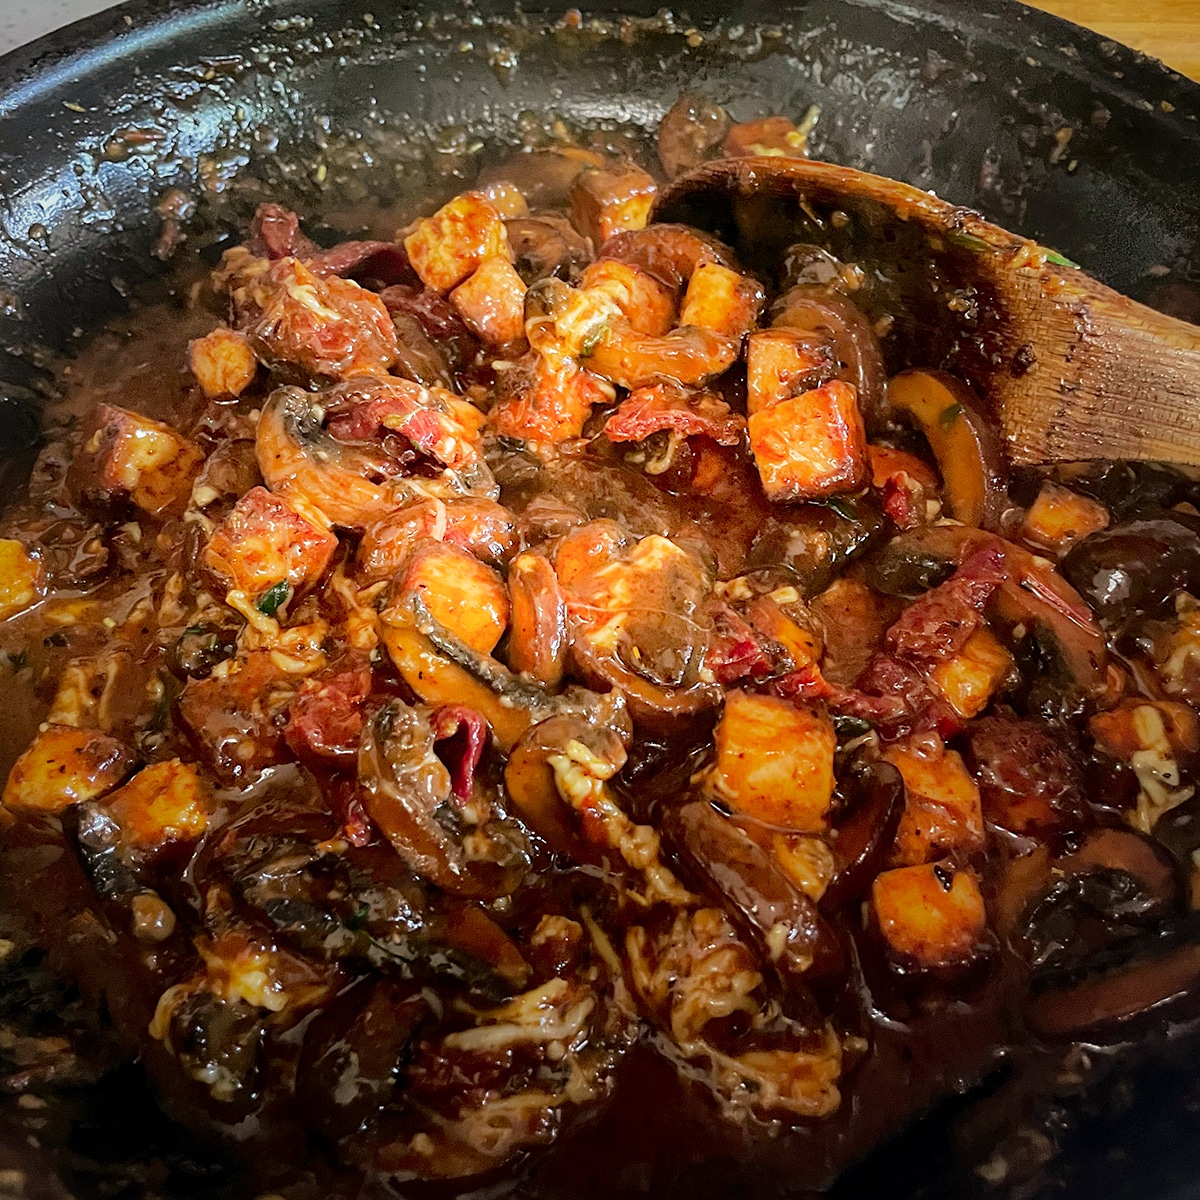 Stirring cooked crispy tofu into the skillet with mushrooms coated in creamy sun-dried tomato sauce.